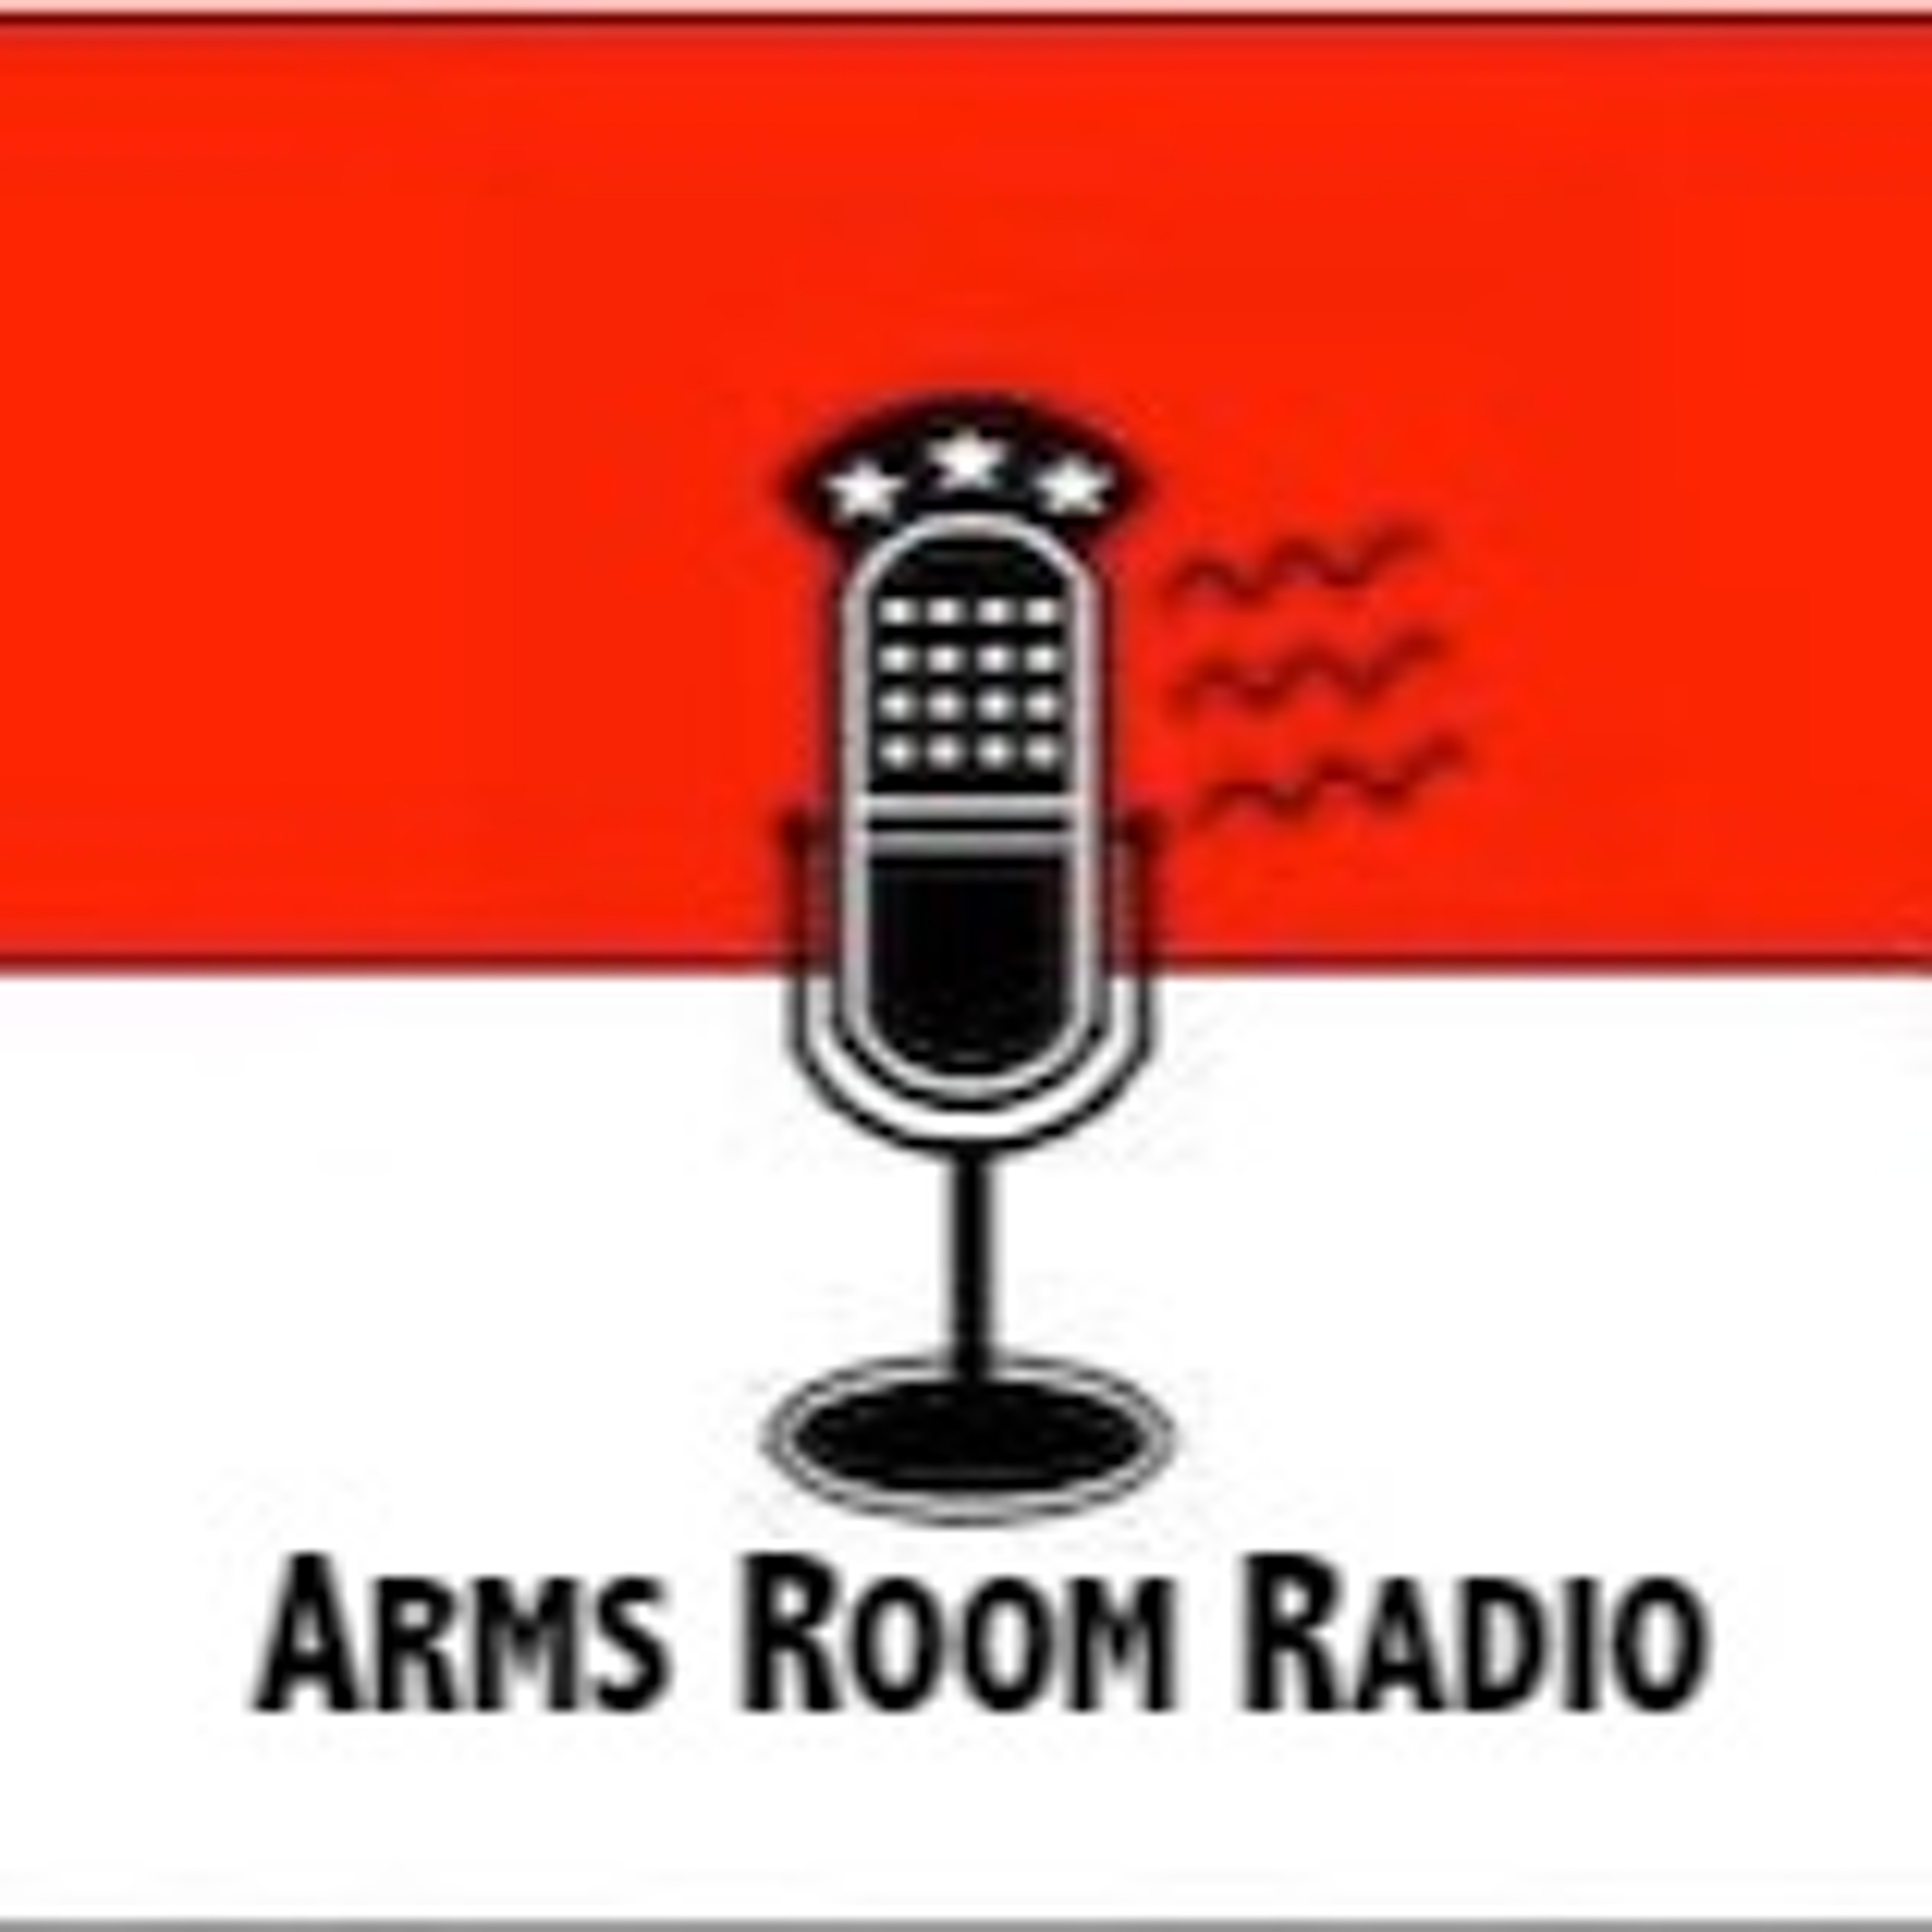 ArmsRoomRadio 04.10.21 Todd Fossey of IDS, and LT Chad of Green Star Tactical